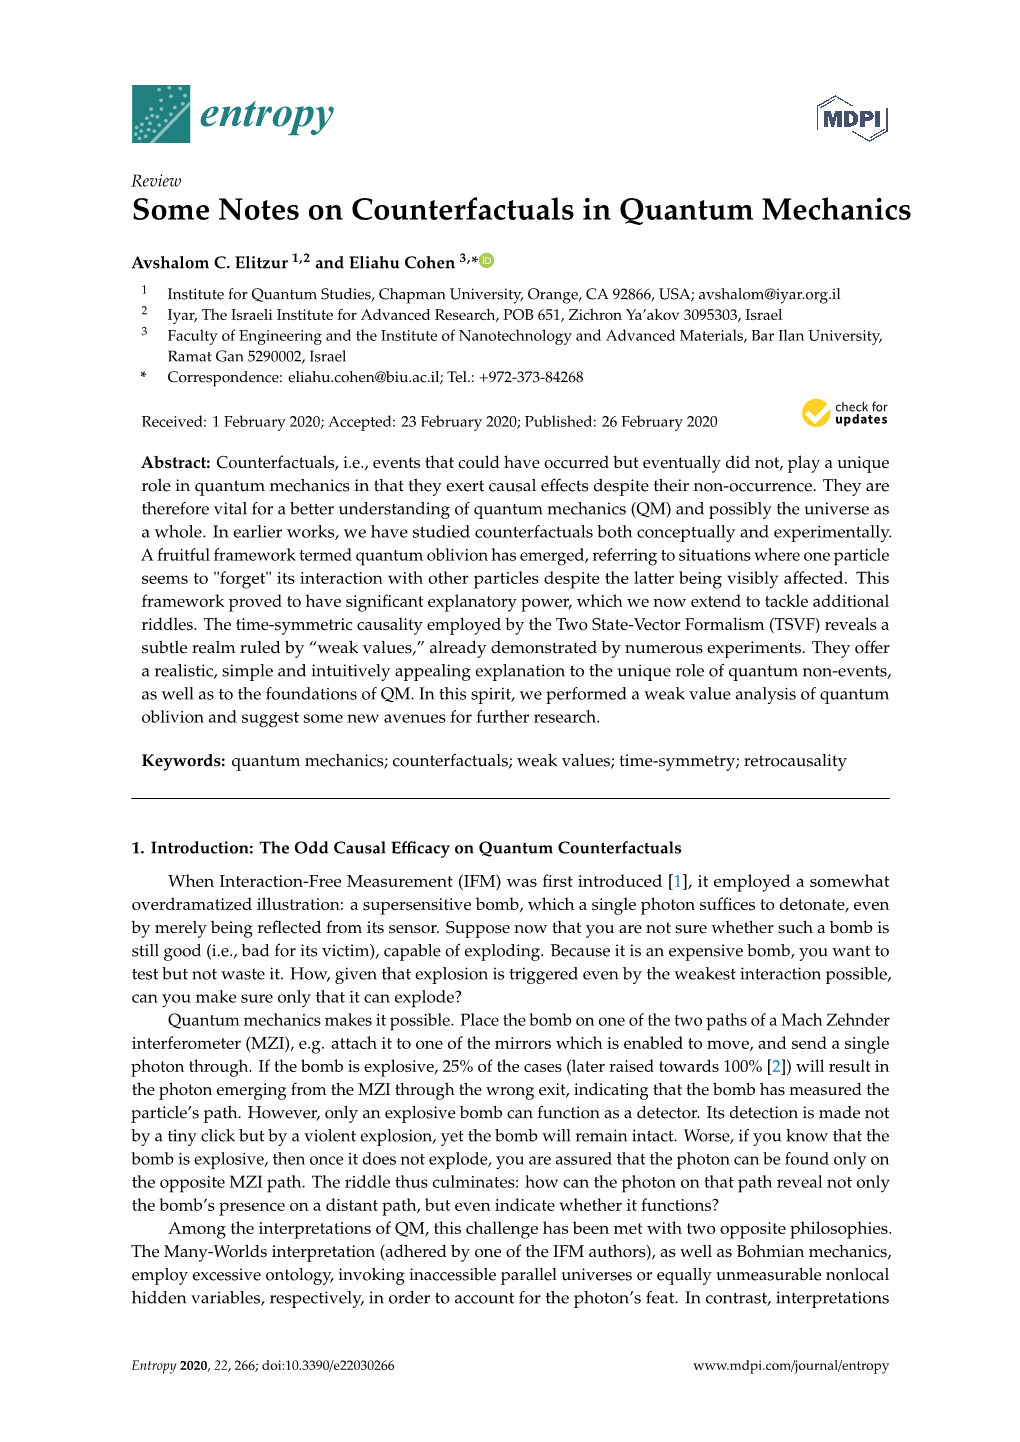 Some Notes on Counterfactuals in Quantum Mechanics